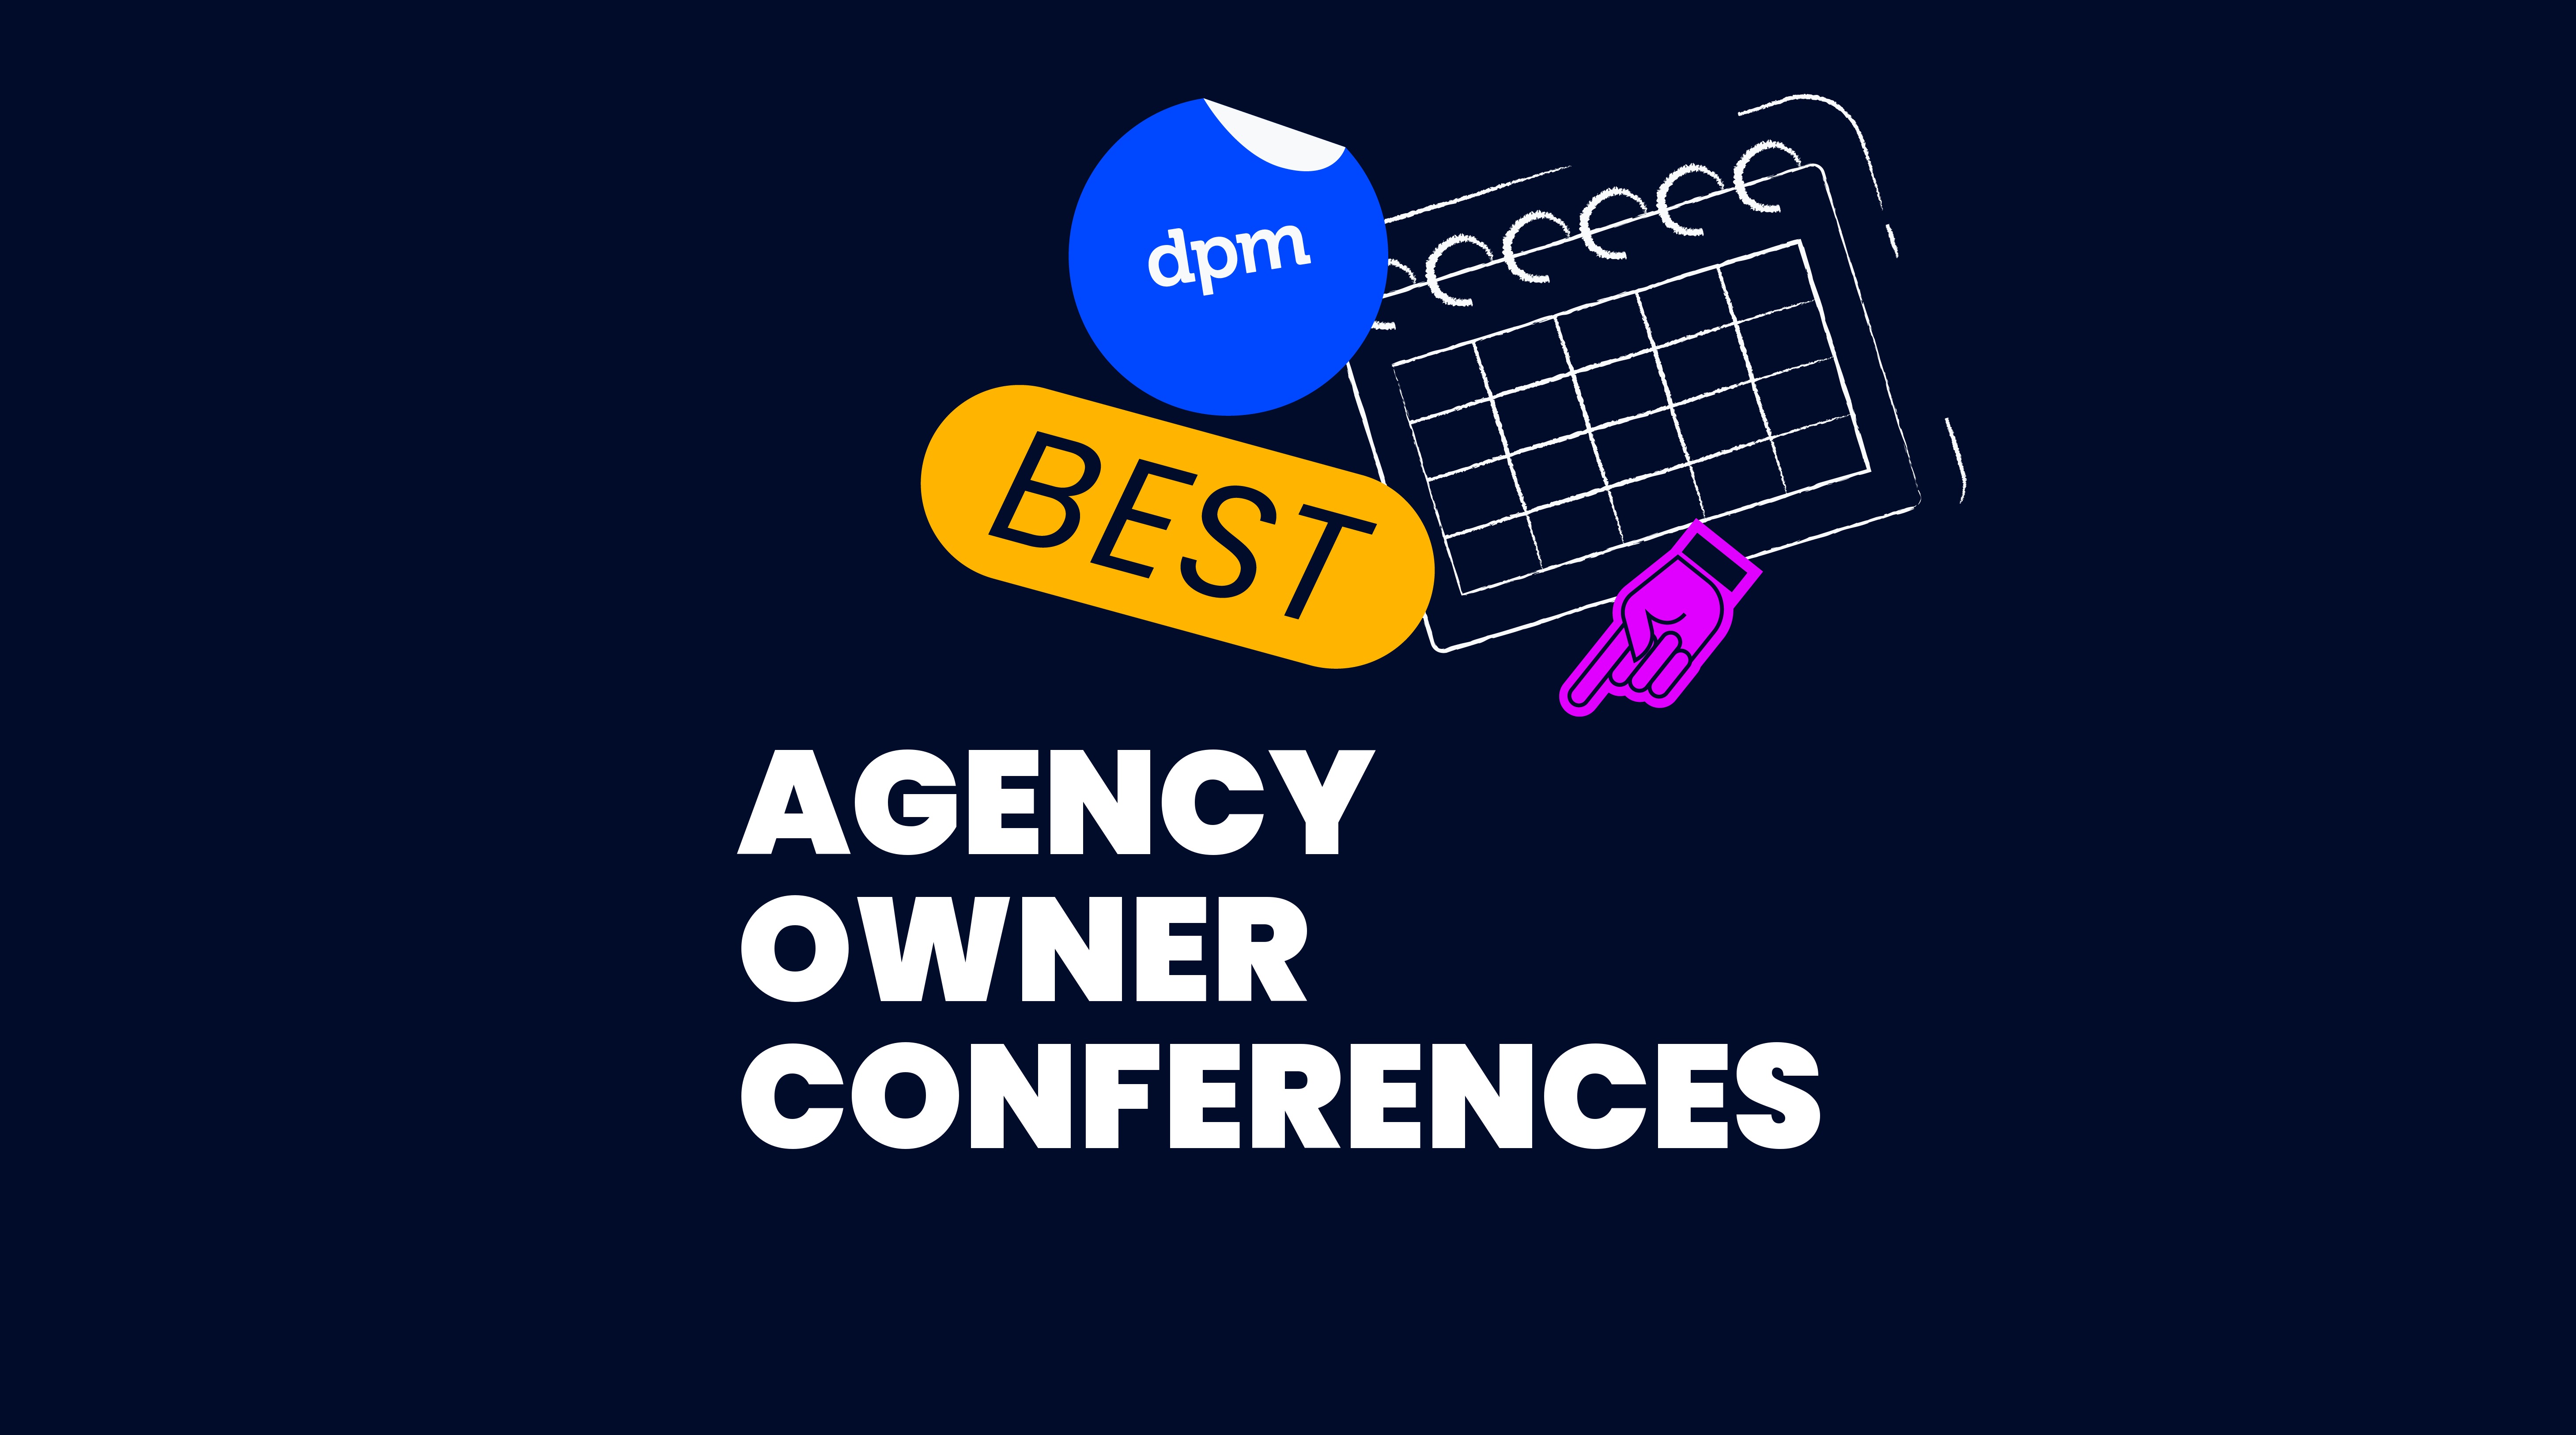 best agency owner conferences text on navy background